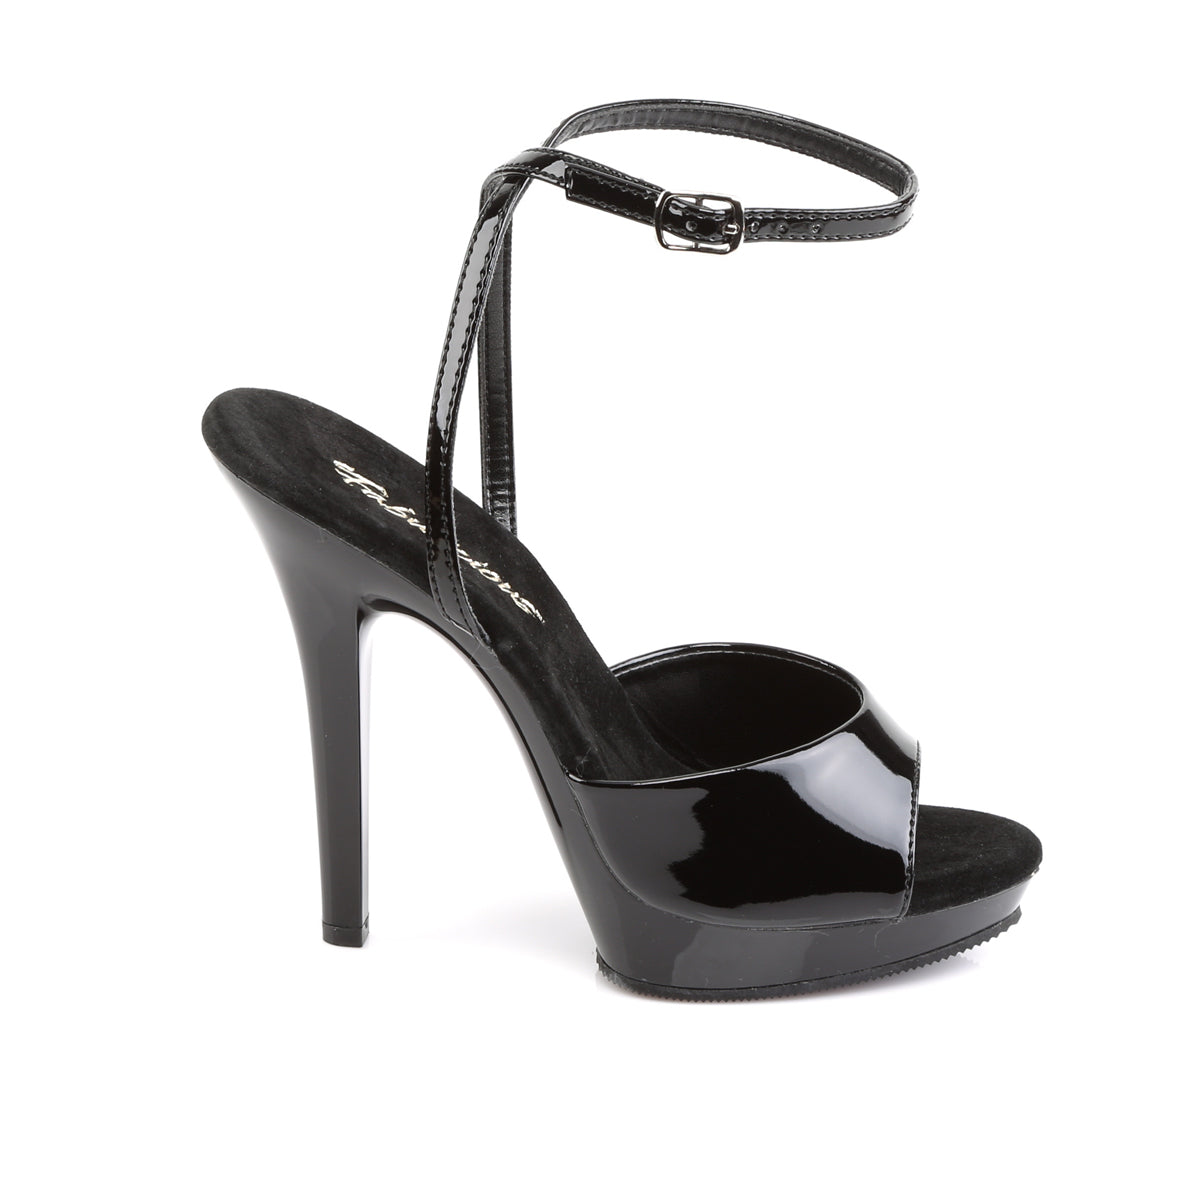 LIP-125 Fabulicious Black Patent Shoes [Sexy Shoes]